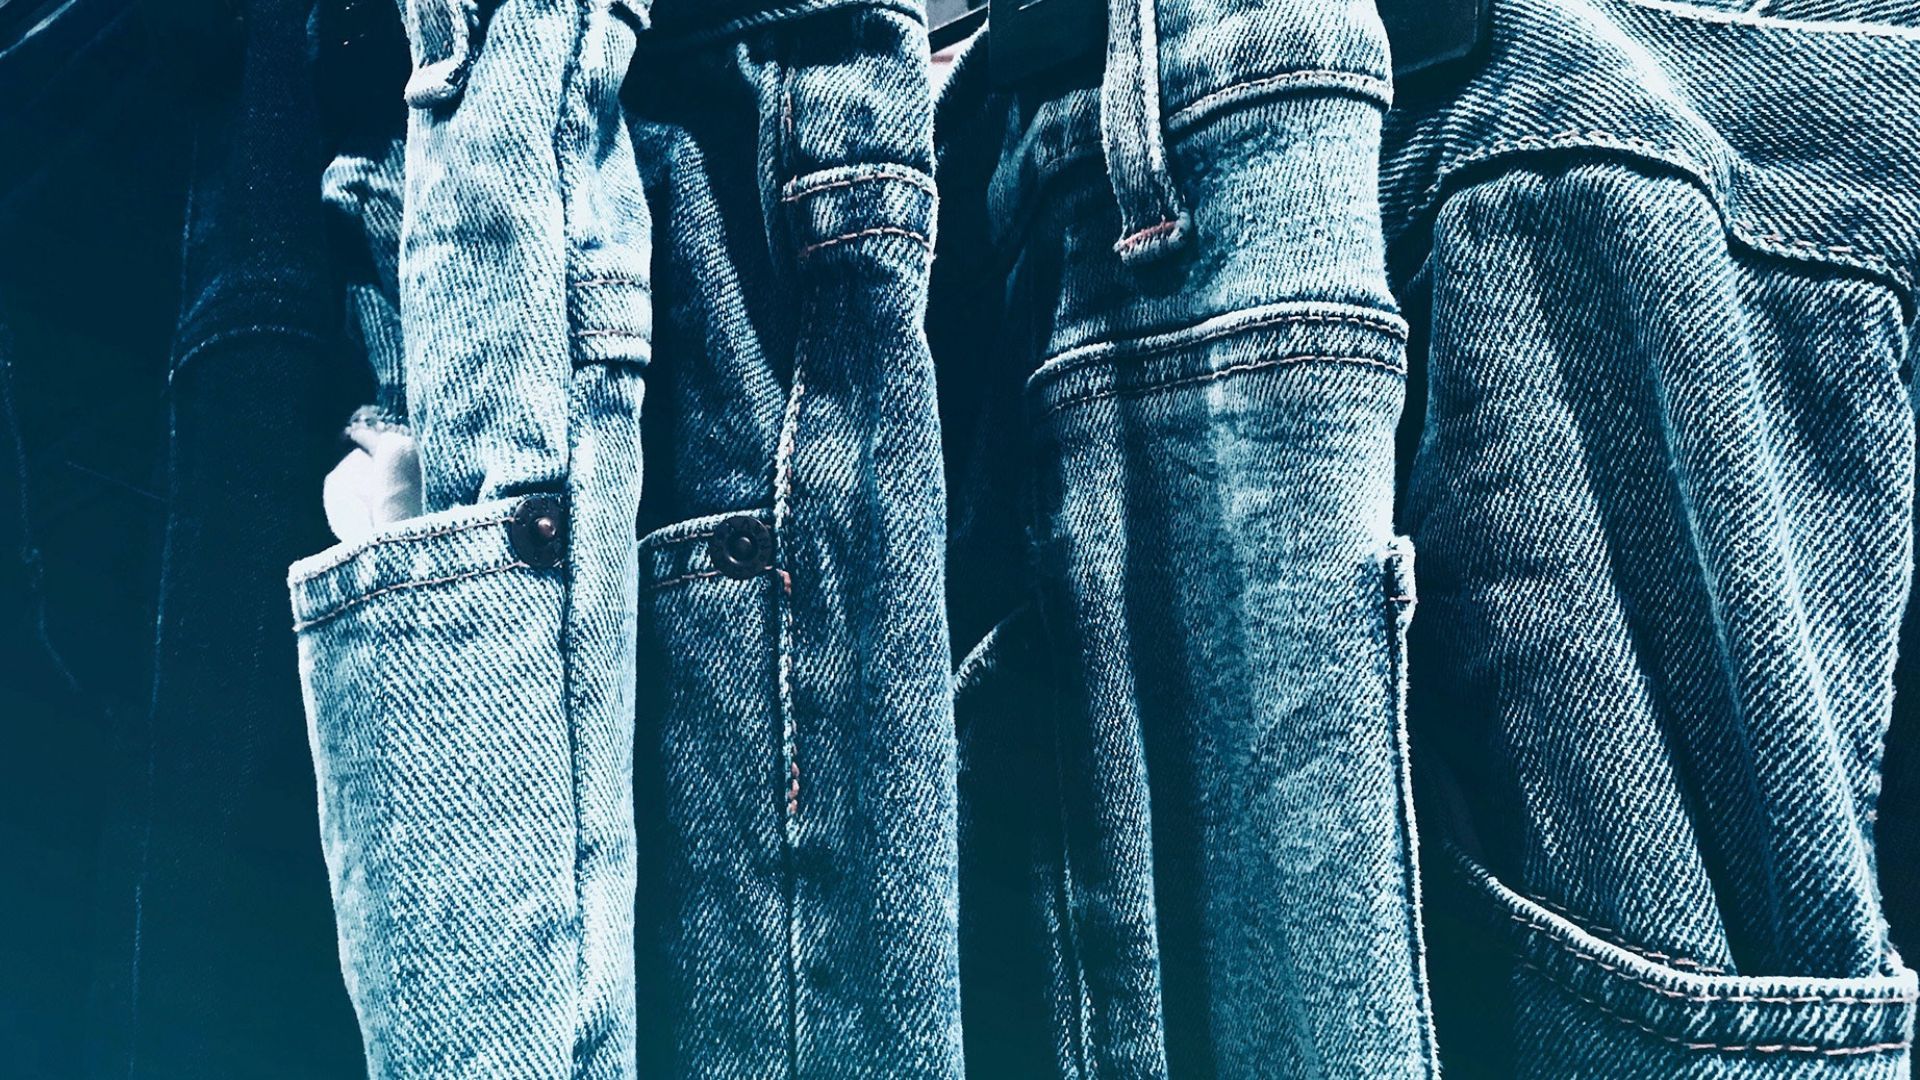 21 Types of Jeans To Master That Denim Look Like A Pro  LooksGudcom